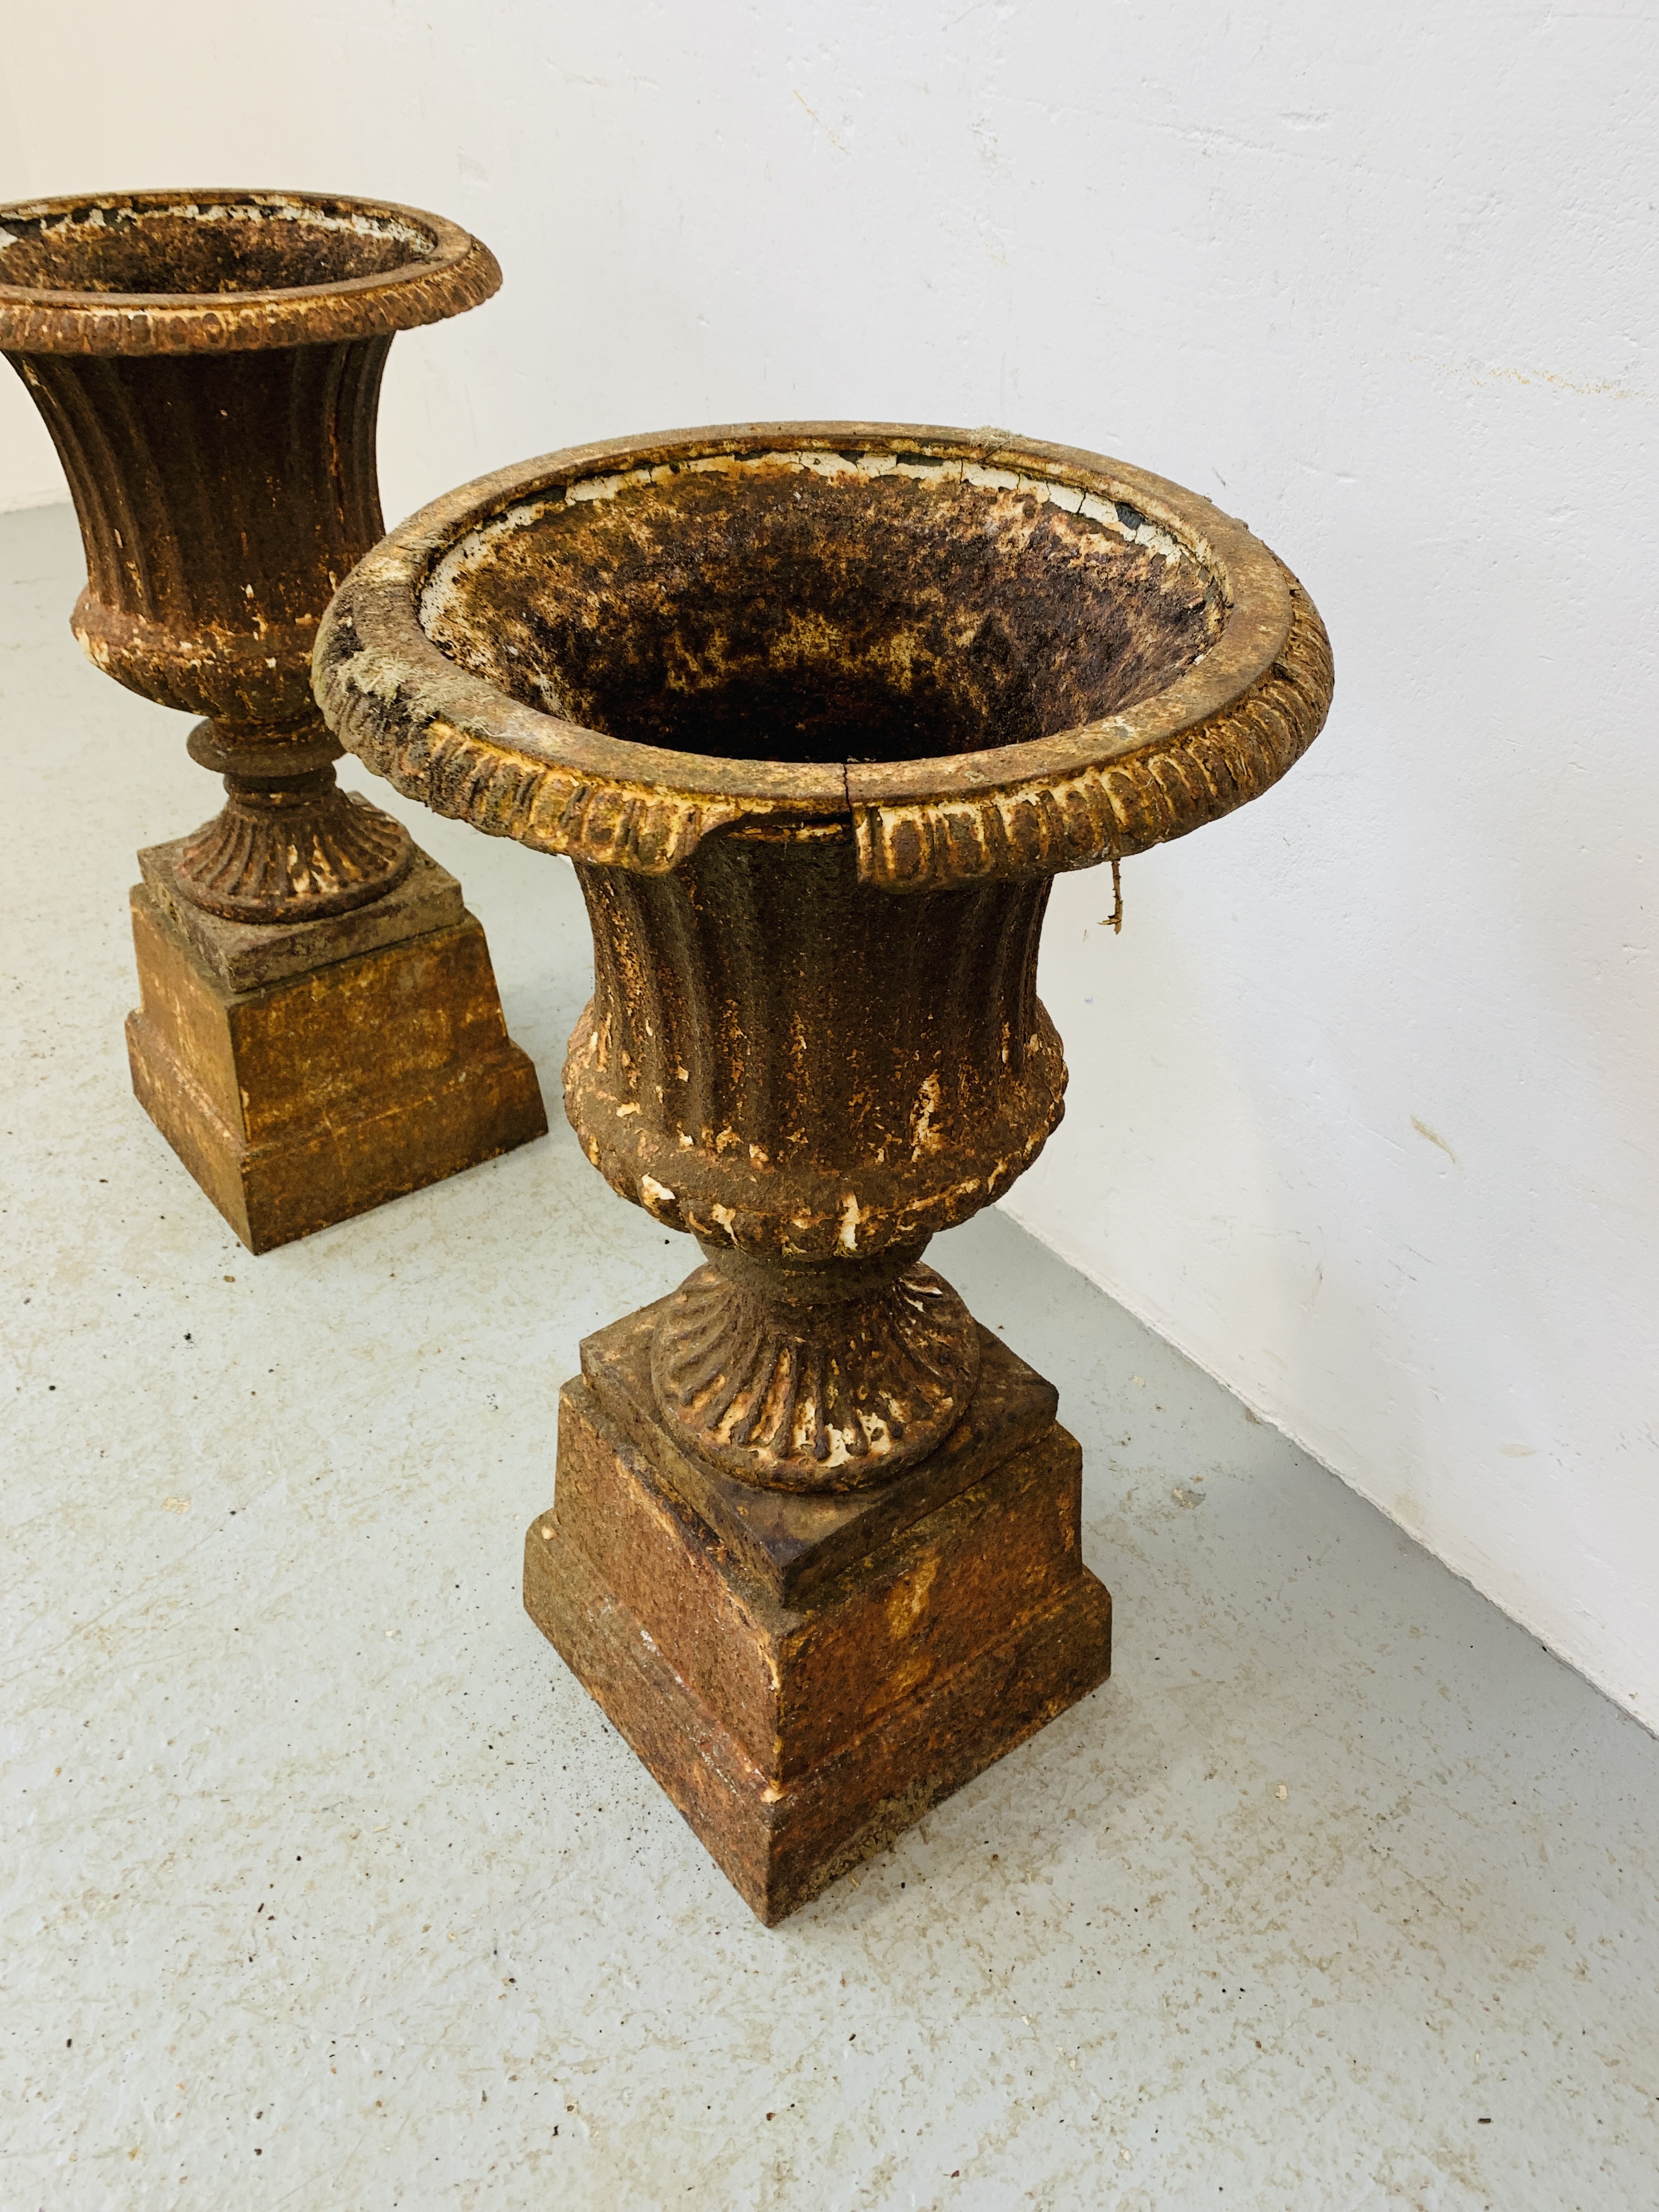 A PAIR OF CAST IRON TULIP SHAPE GARDEN URNS ON STANDS A/F CONDITION - OVERALL HEIGHT 68CM. - Image 9 of 13